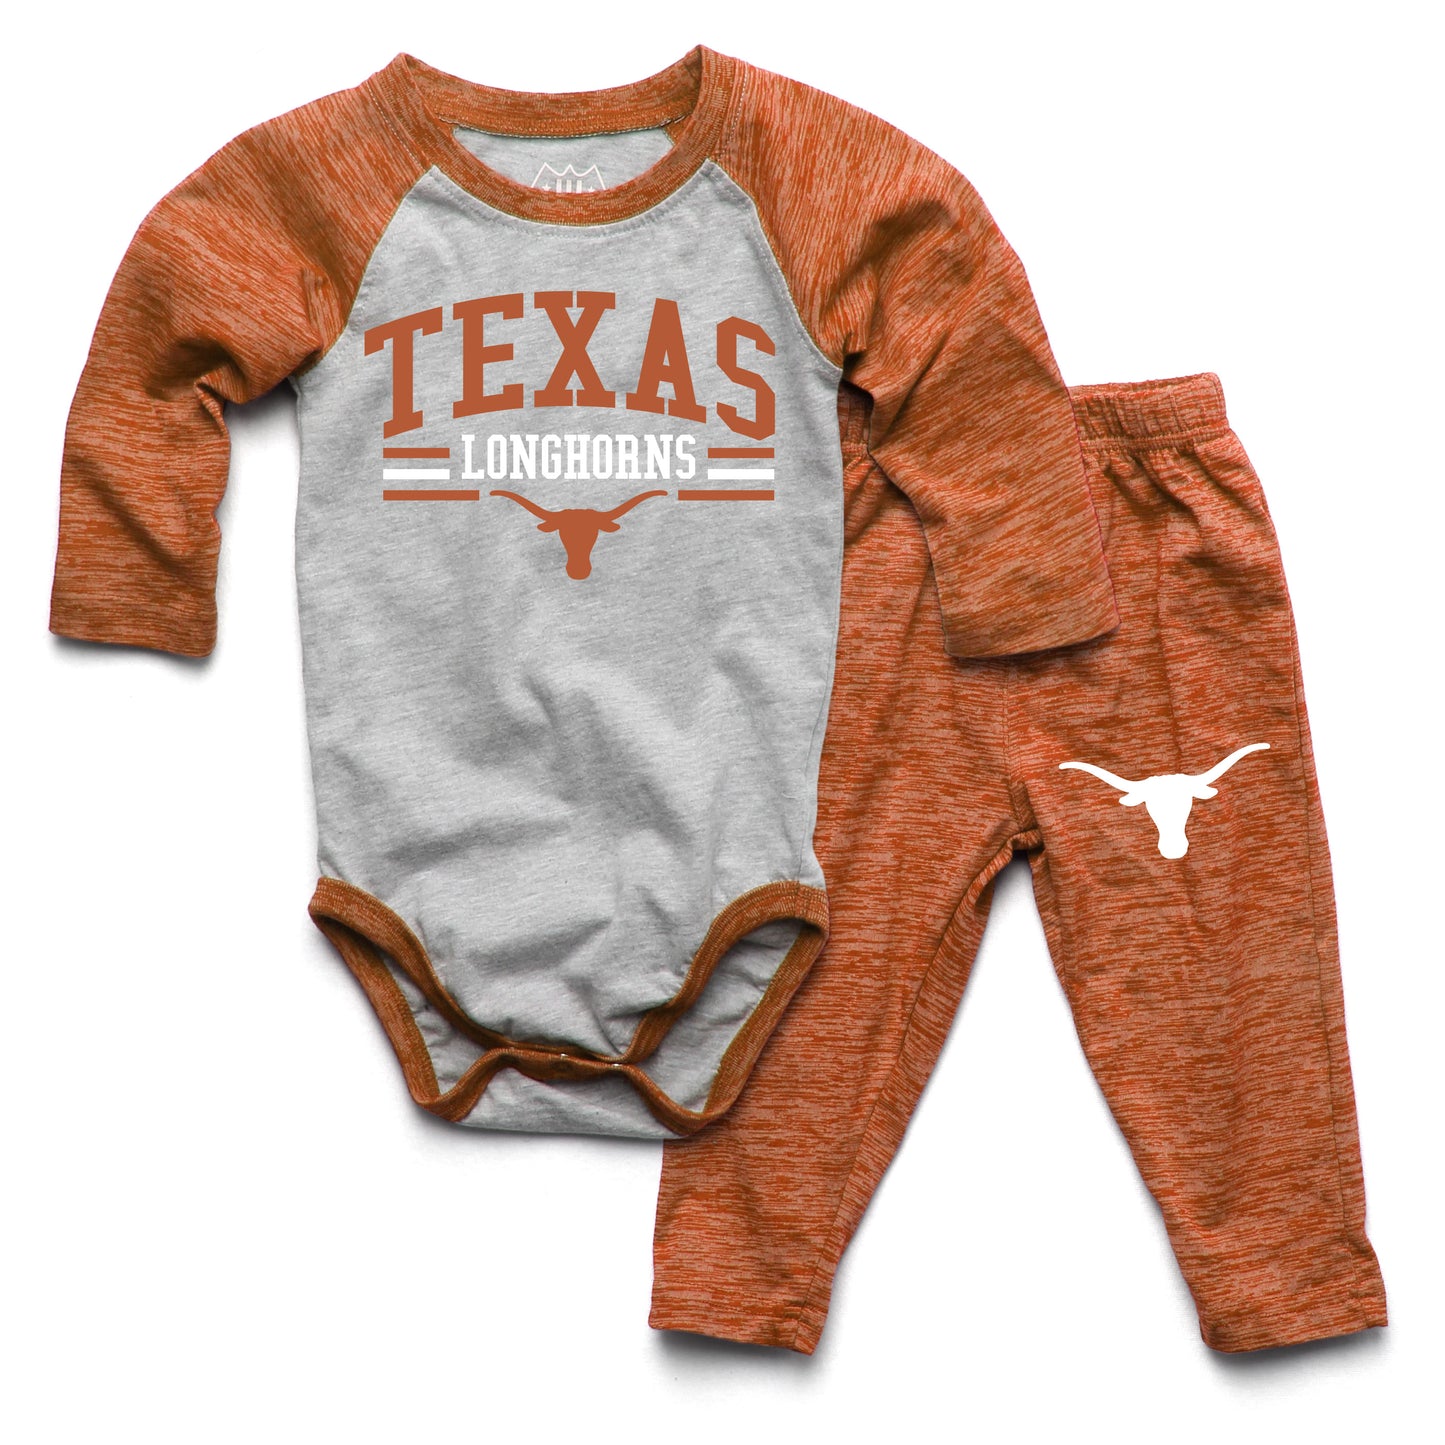 Texas Longhorns Wes and Willy Baby College Team Hopper and Pant Set